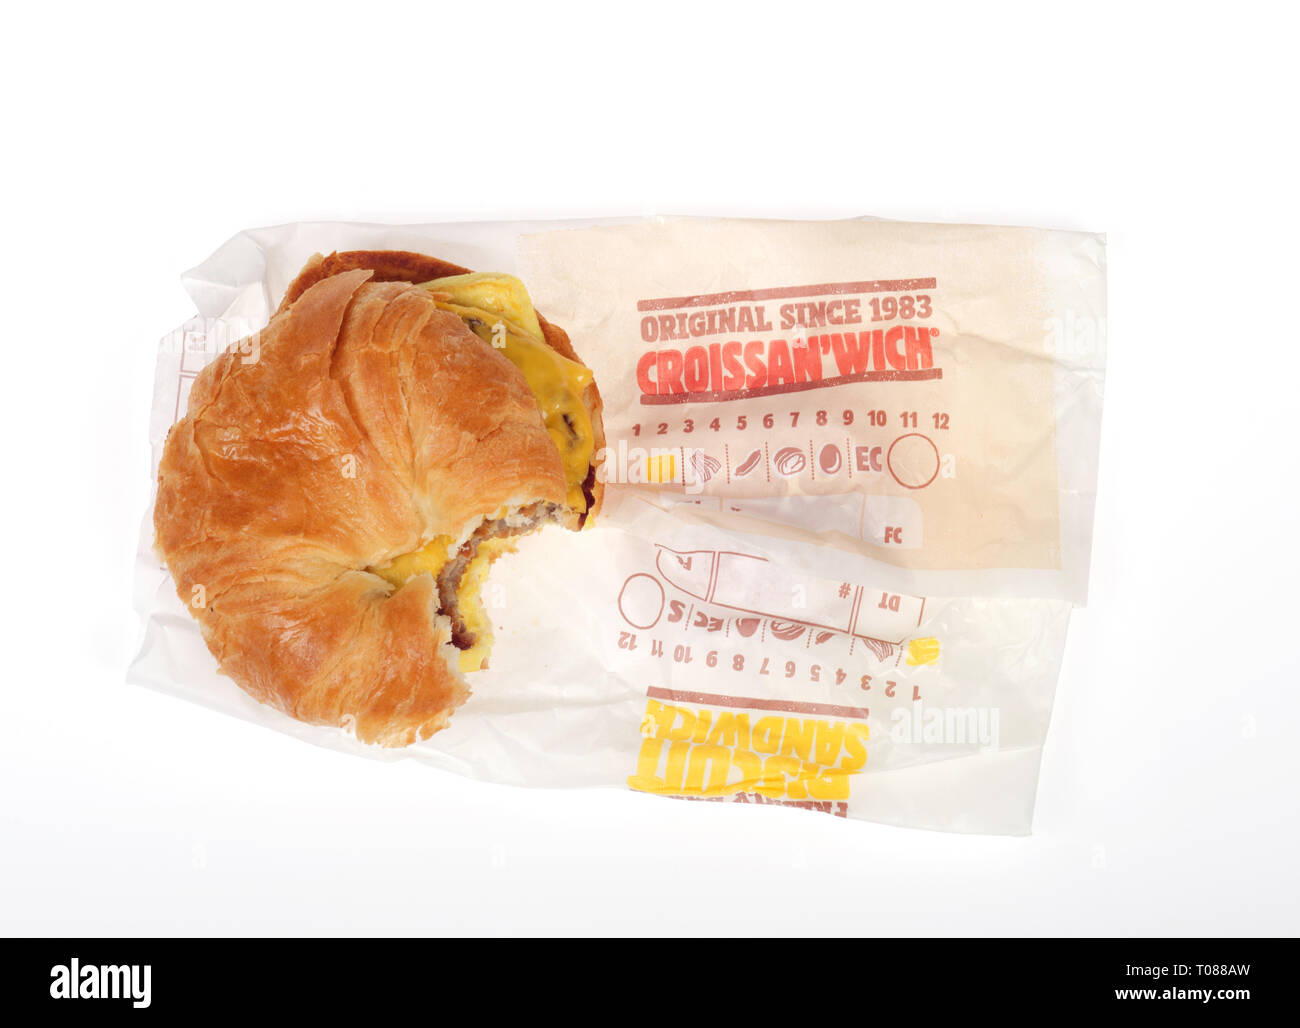 Burger King Sausage, Egg and Cheese croissant Croissan’wich with bite taken out and wrapper on white background Stock Photo